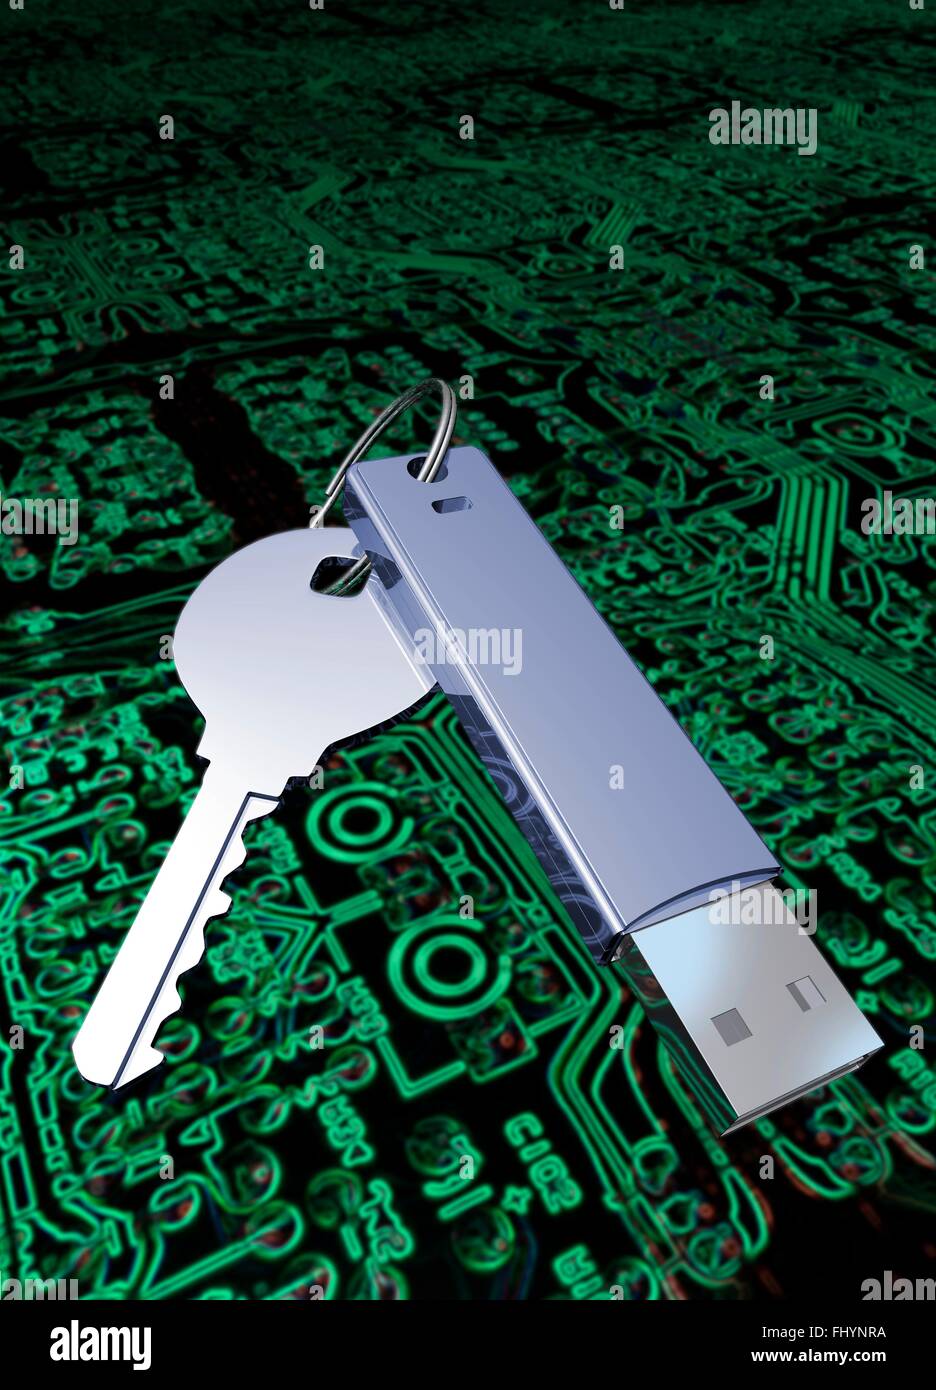 Key with a USB (universal serial bus) device and circuit board. Stock Photo